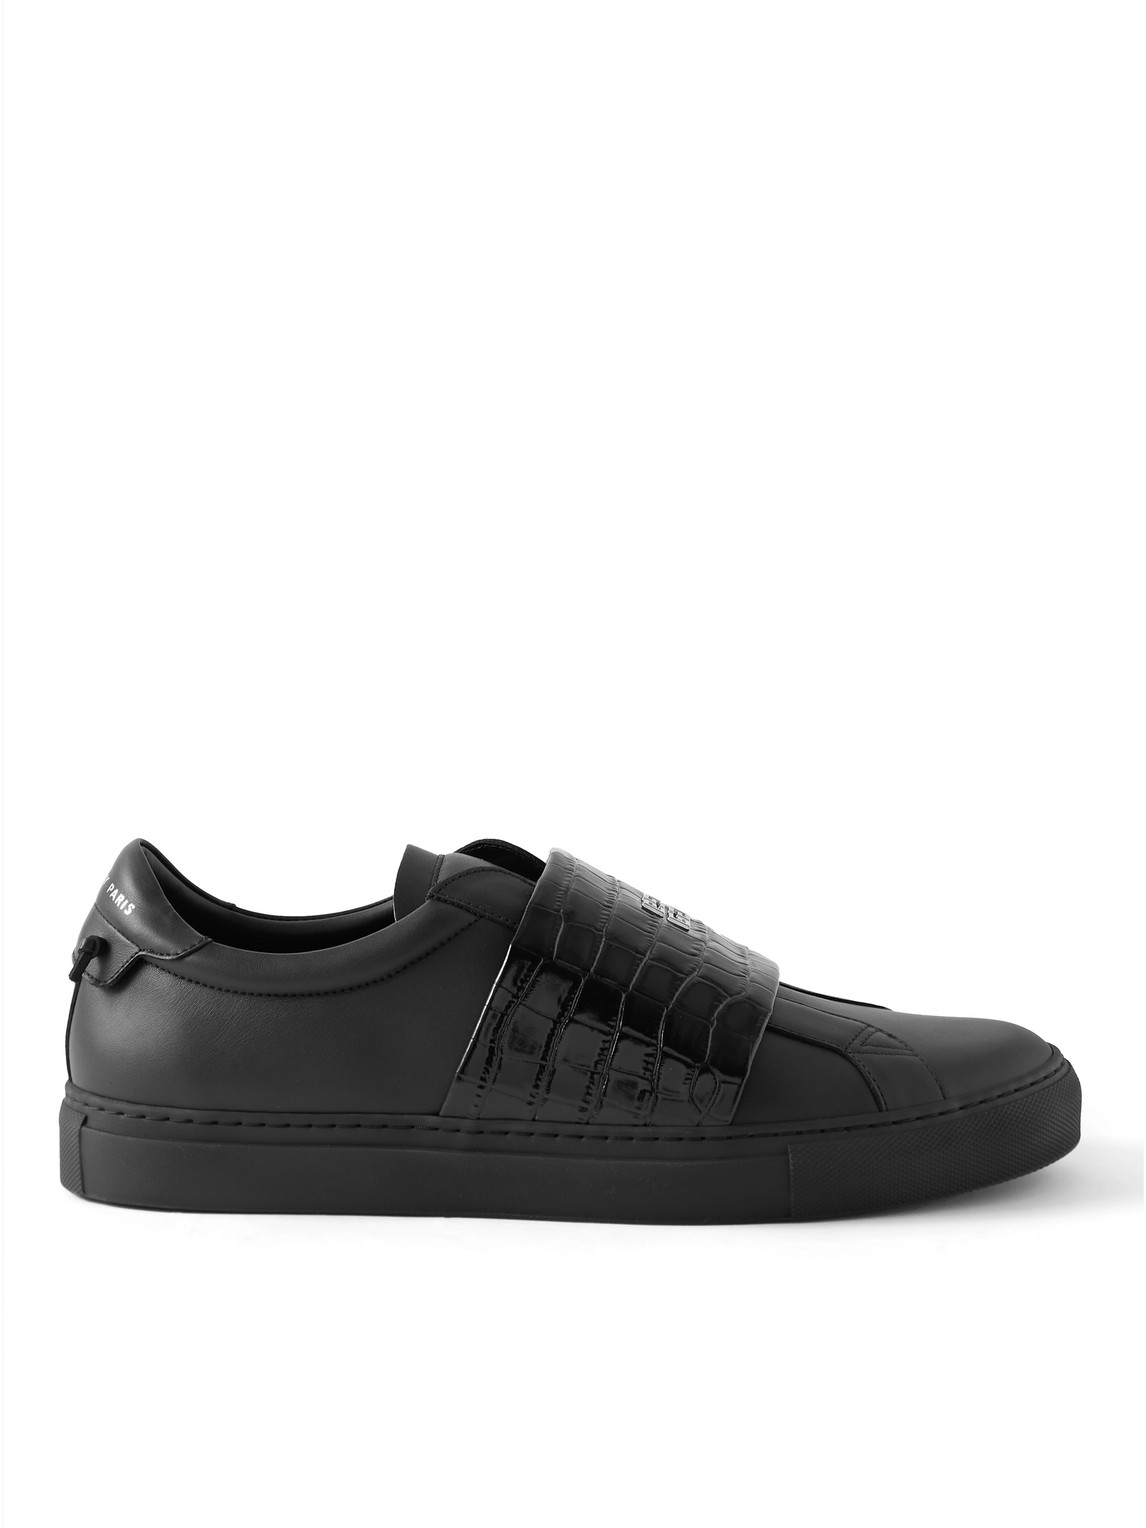 GIVENCHY URBAN STREET SMOOTH AND CROC-EFFECT LEATHER SLIP-ON SNEAKERS